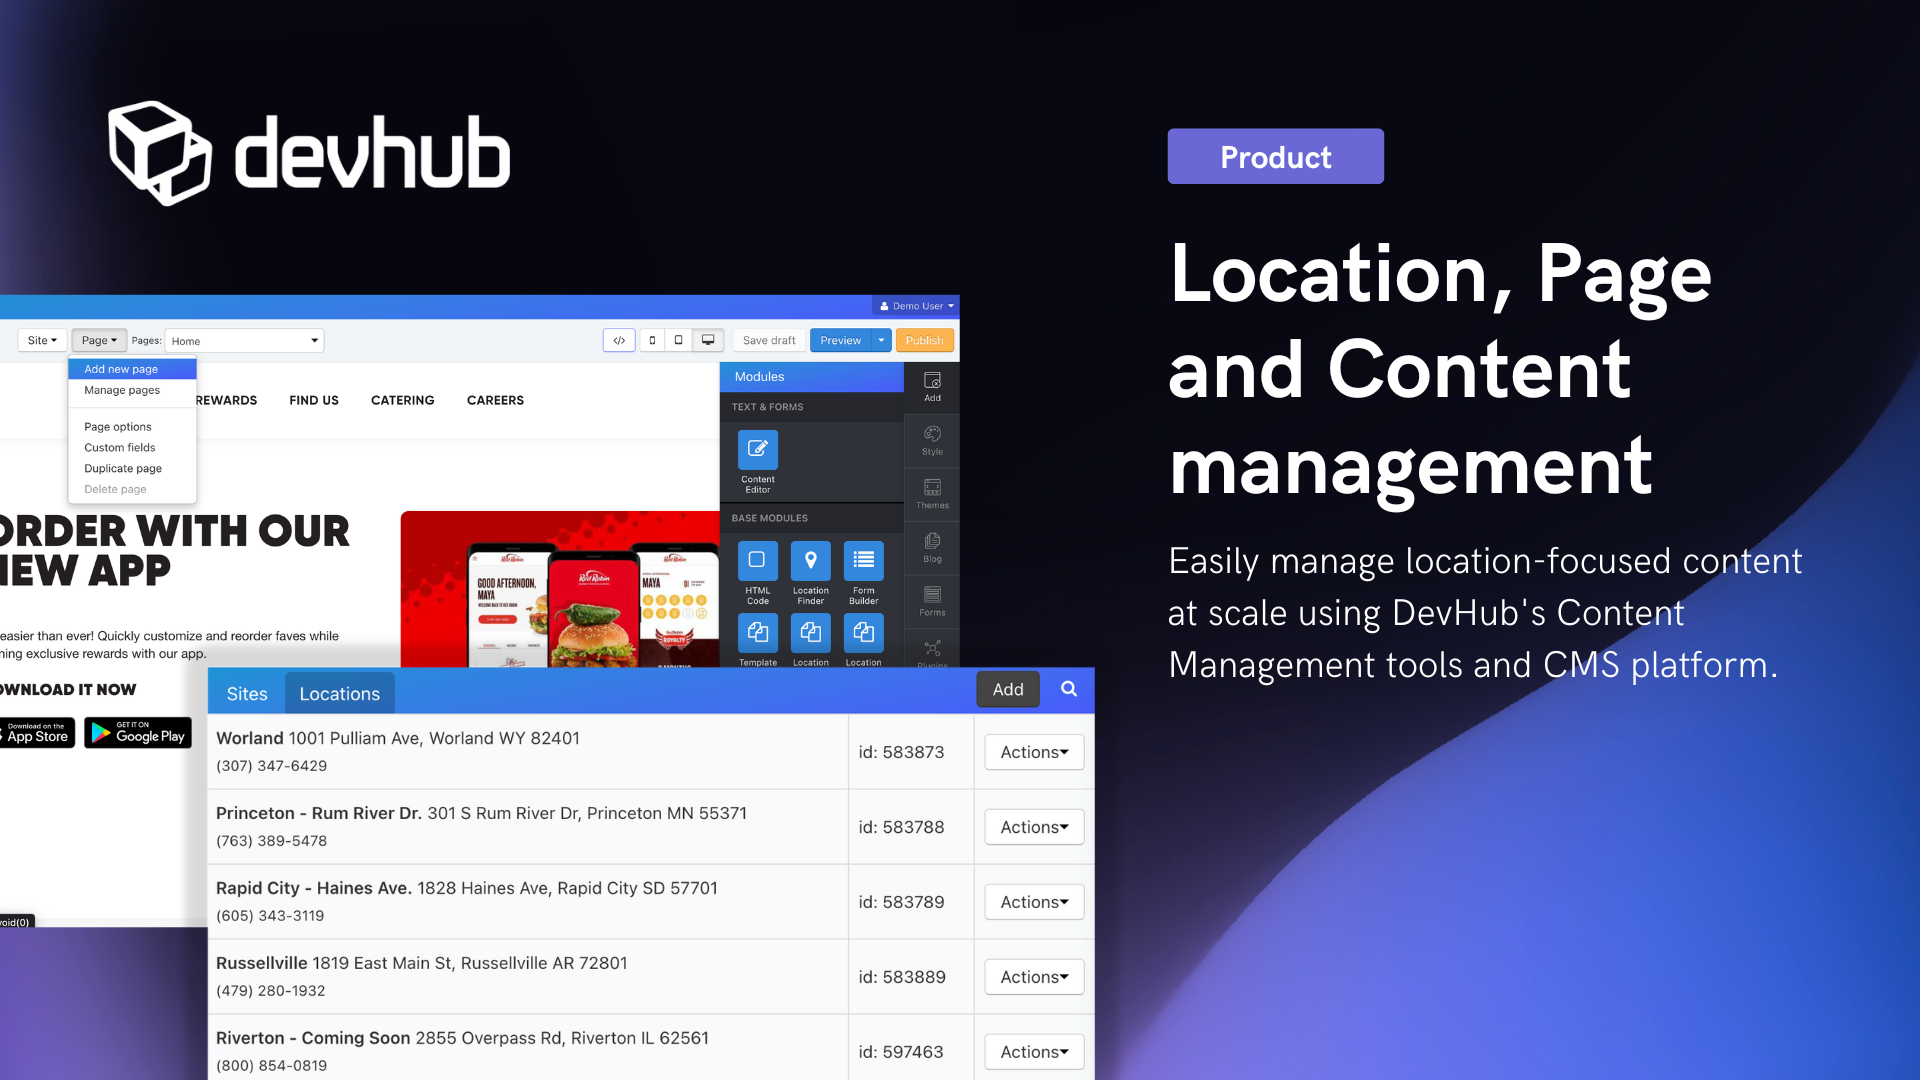 Local, page and content management platform